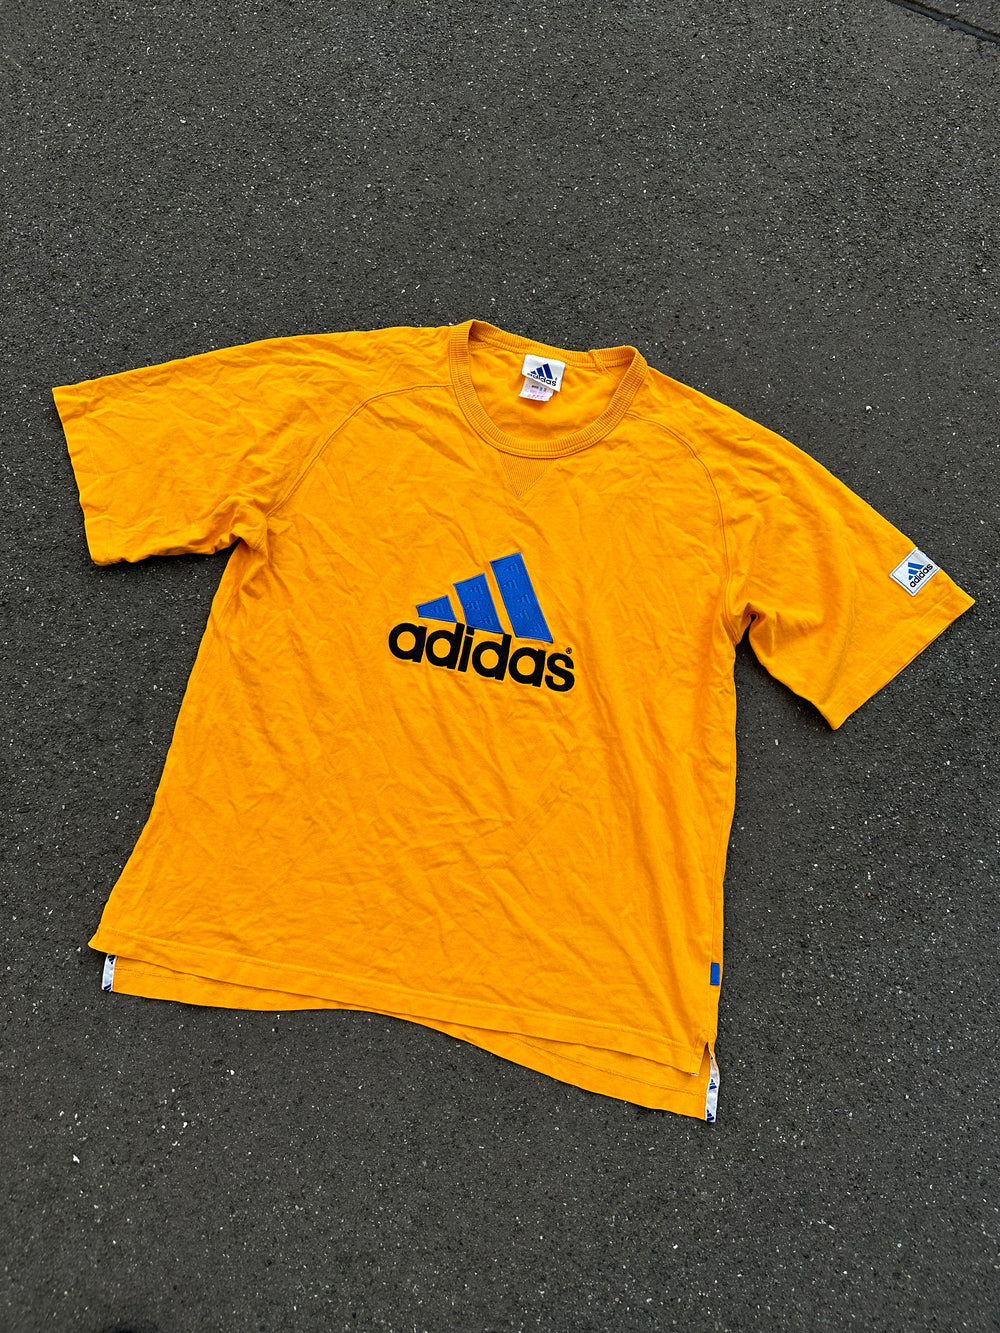 Early 2000s Adidas embroidered T-Shirt (L)